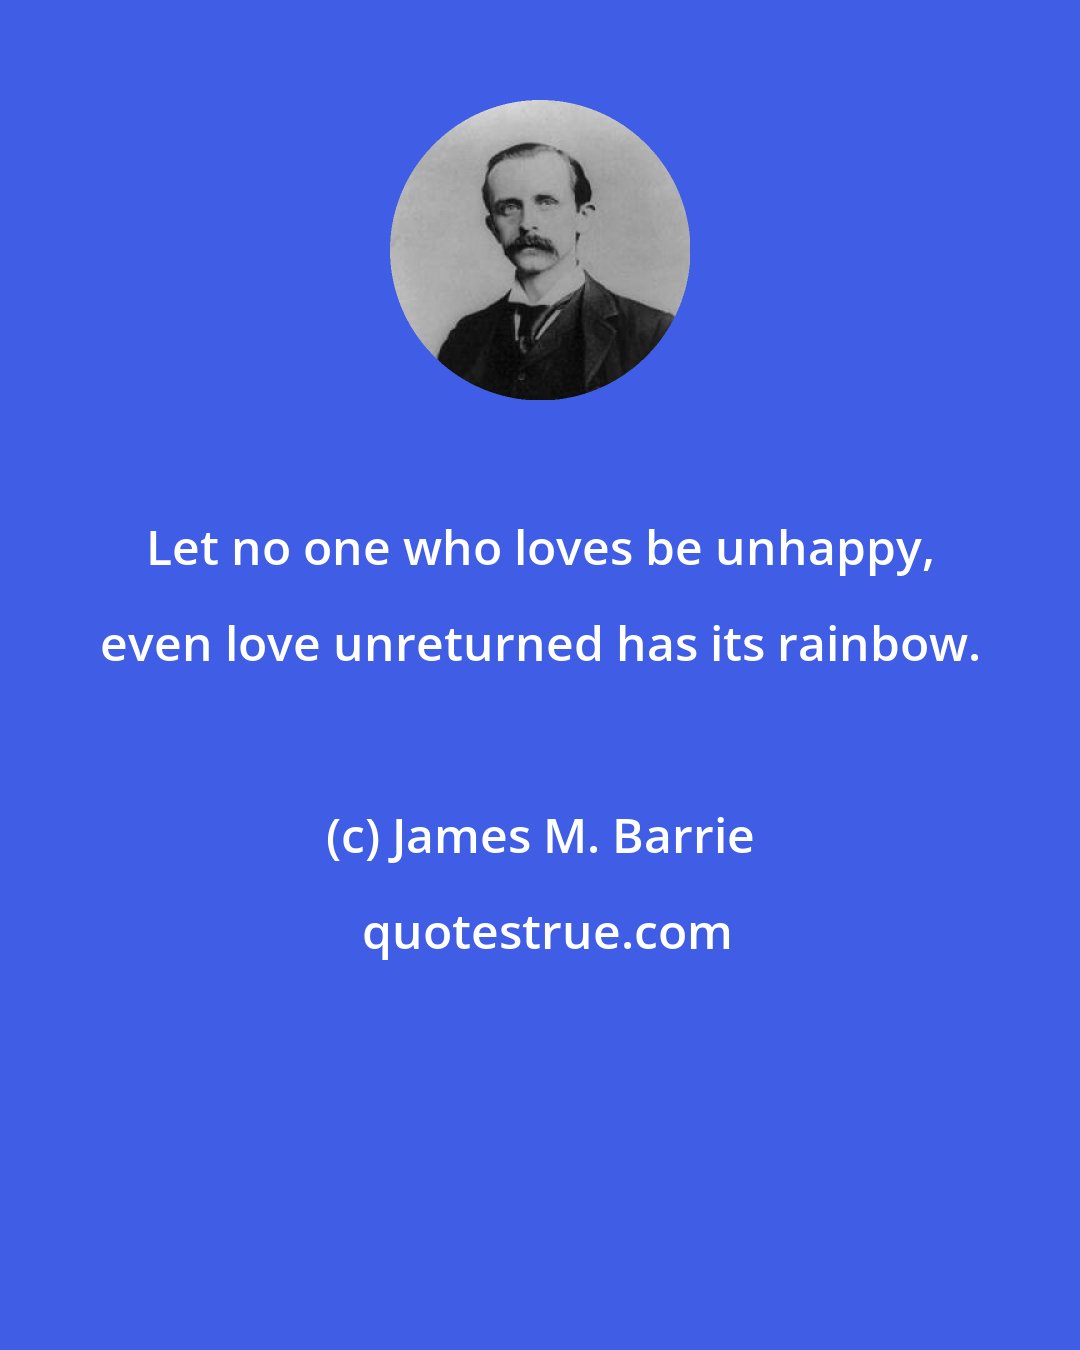 James M. Barrie: Let no one who loves be unhappy, even love unreturned has its rainbow.